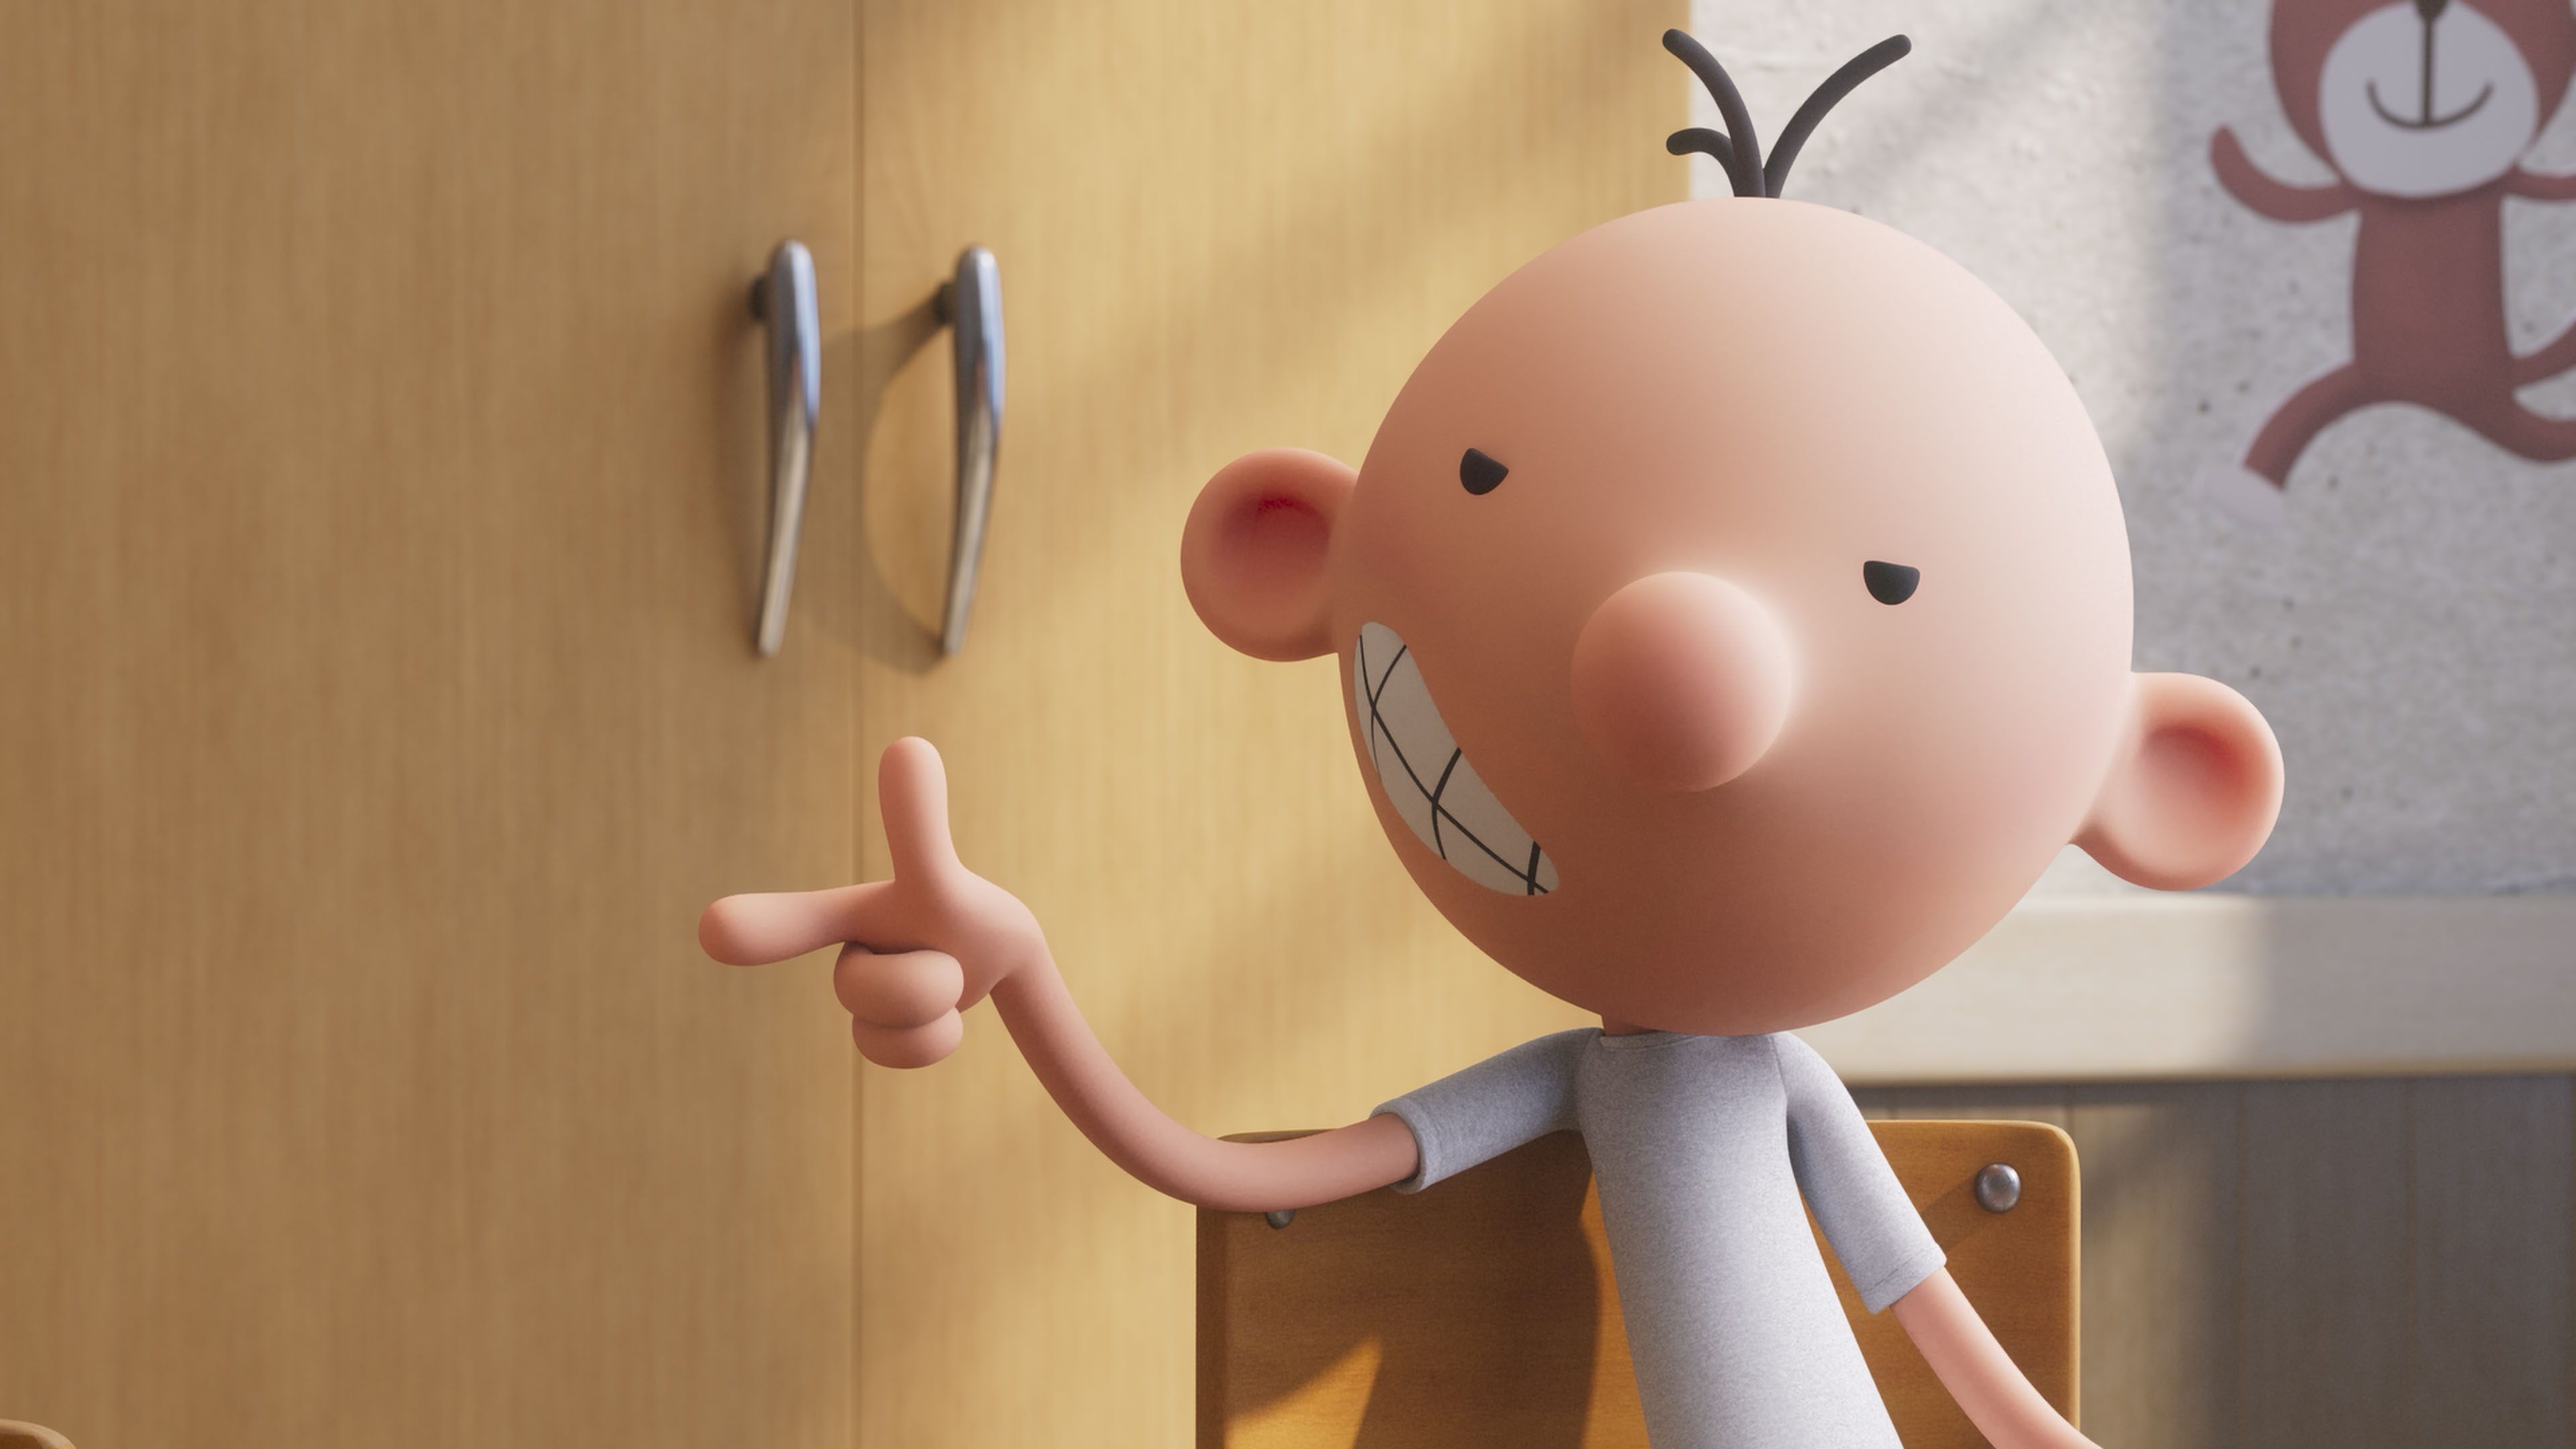 Diary of a Wimpy Kid Star Explains His Sincere Take on Greg Heffley